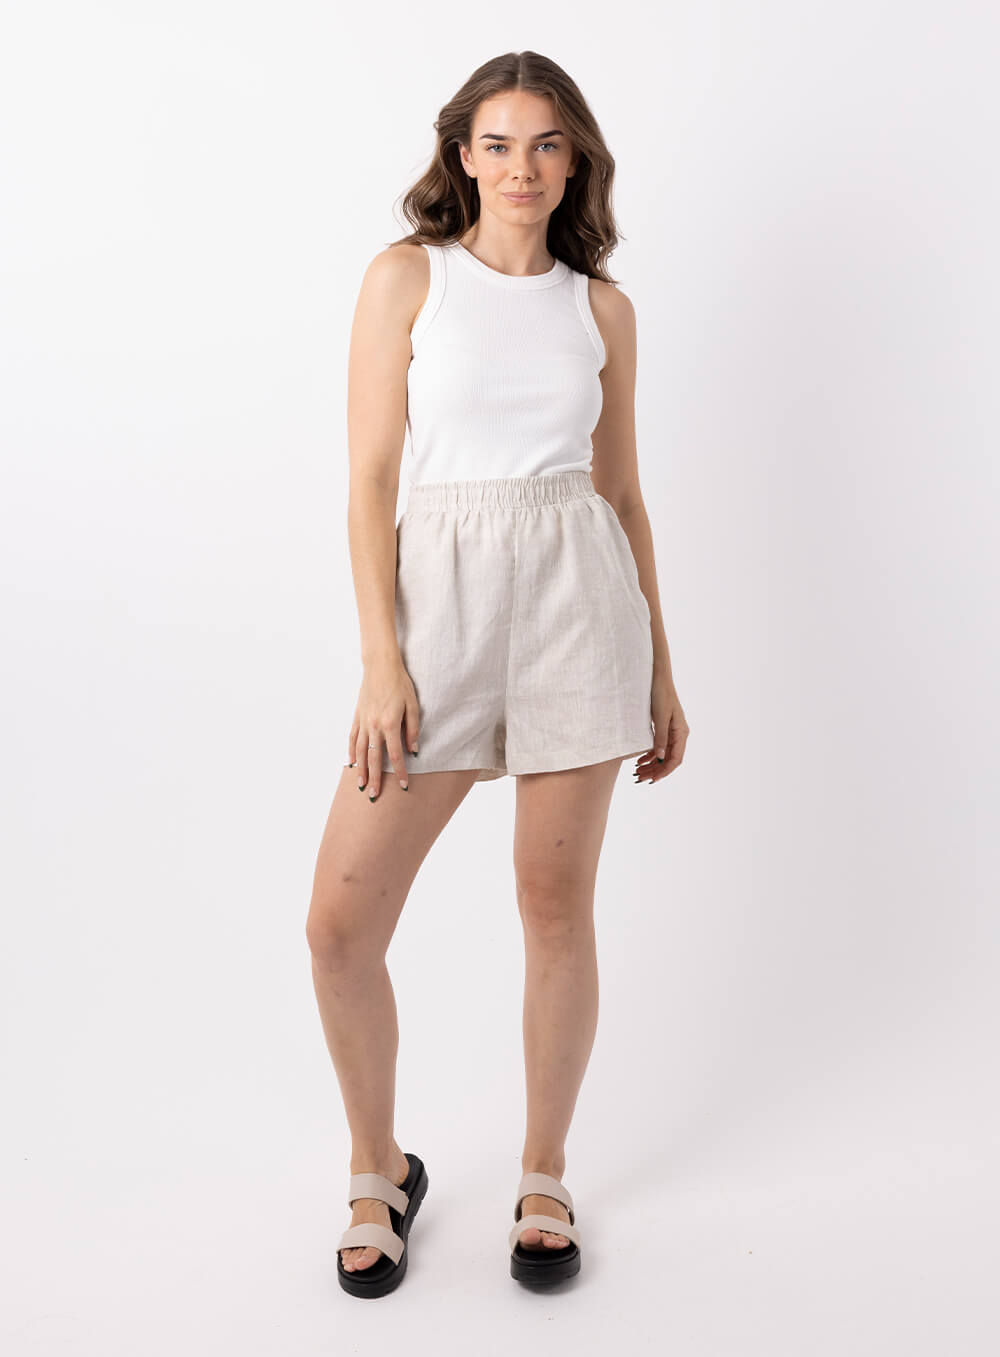 The Ali Linen Short in biege is 100% breathable lien, mid thigh in length with 2 side pockets, no back pockets, elastic waistband and designed to be worn high wiasted and loose fitting